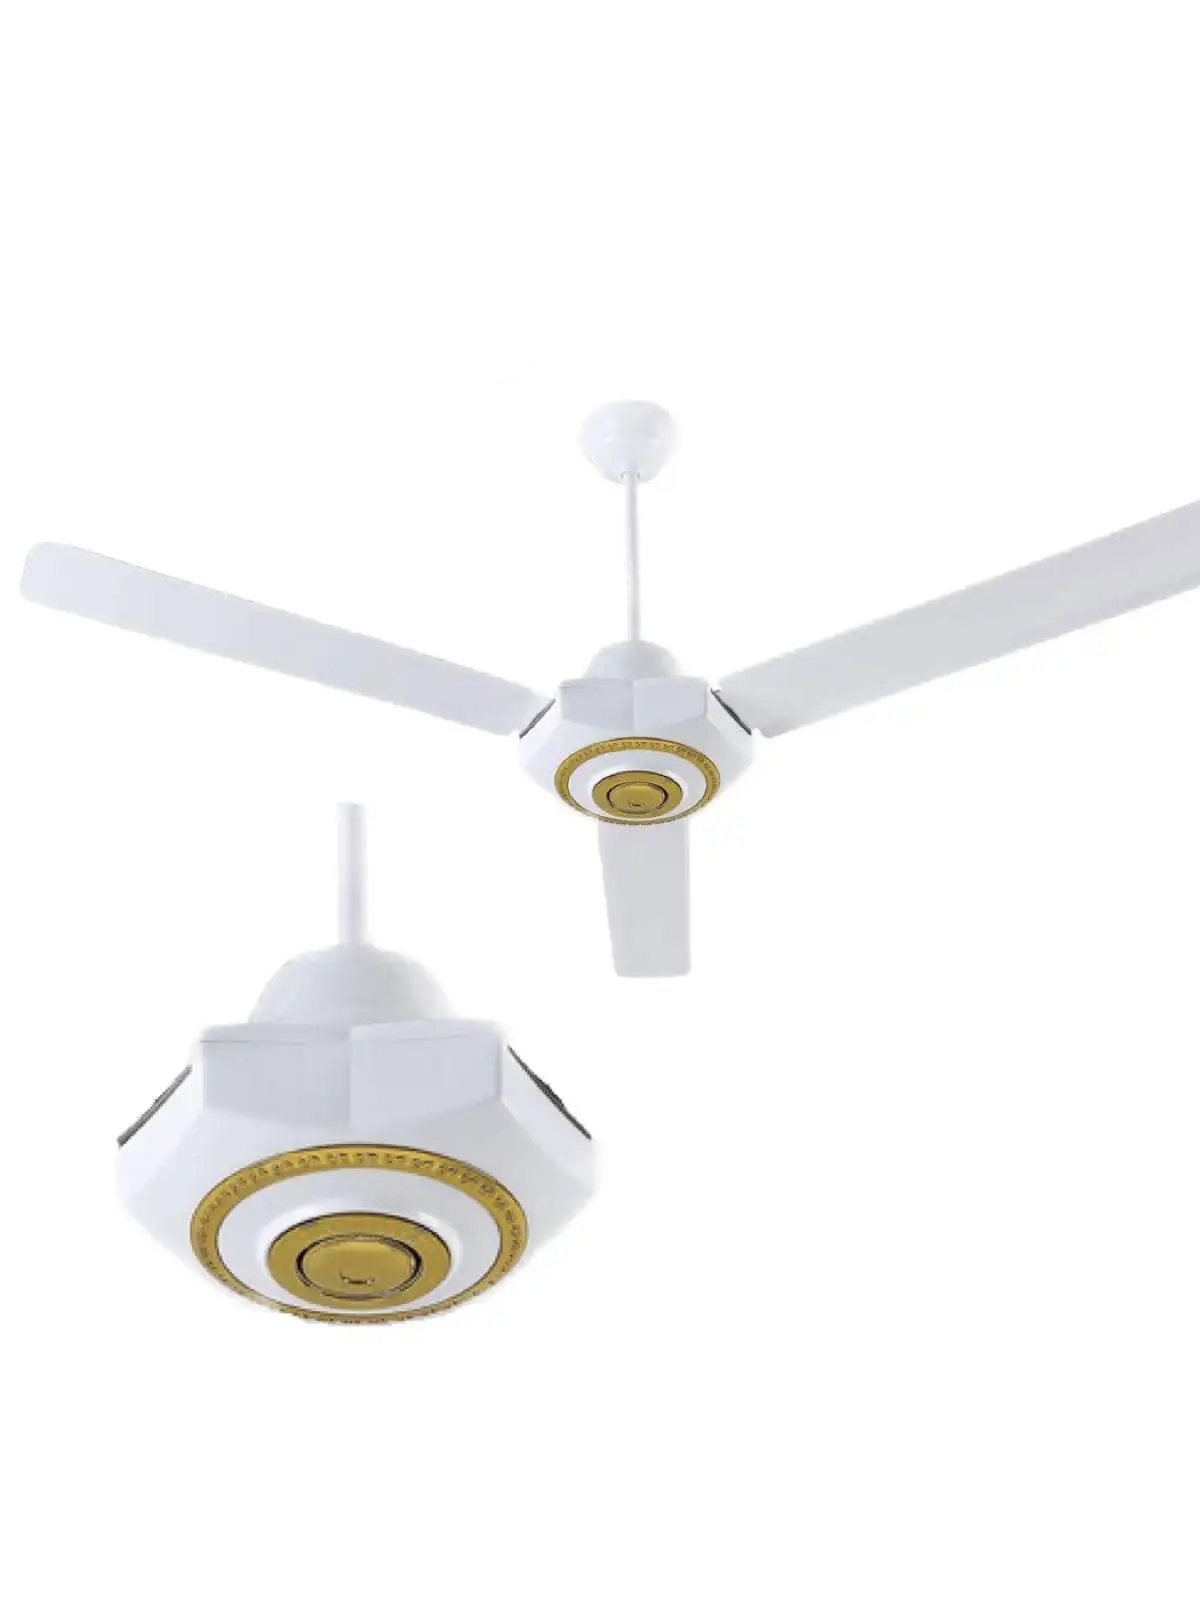 The submarine ceiling fan is in signature white by B National